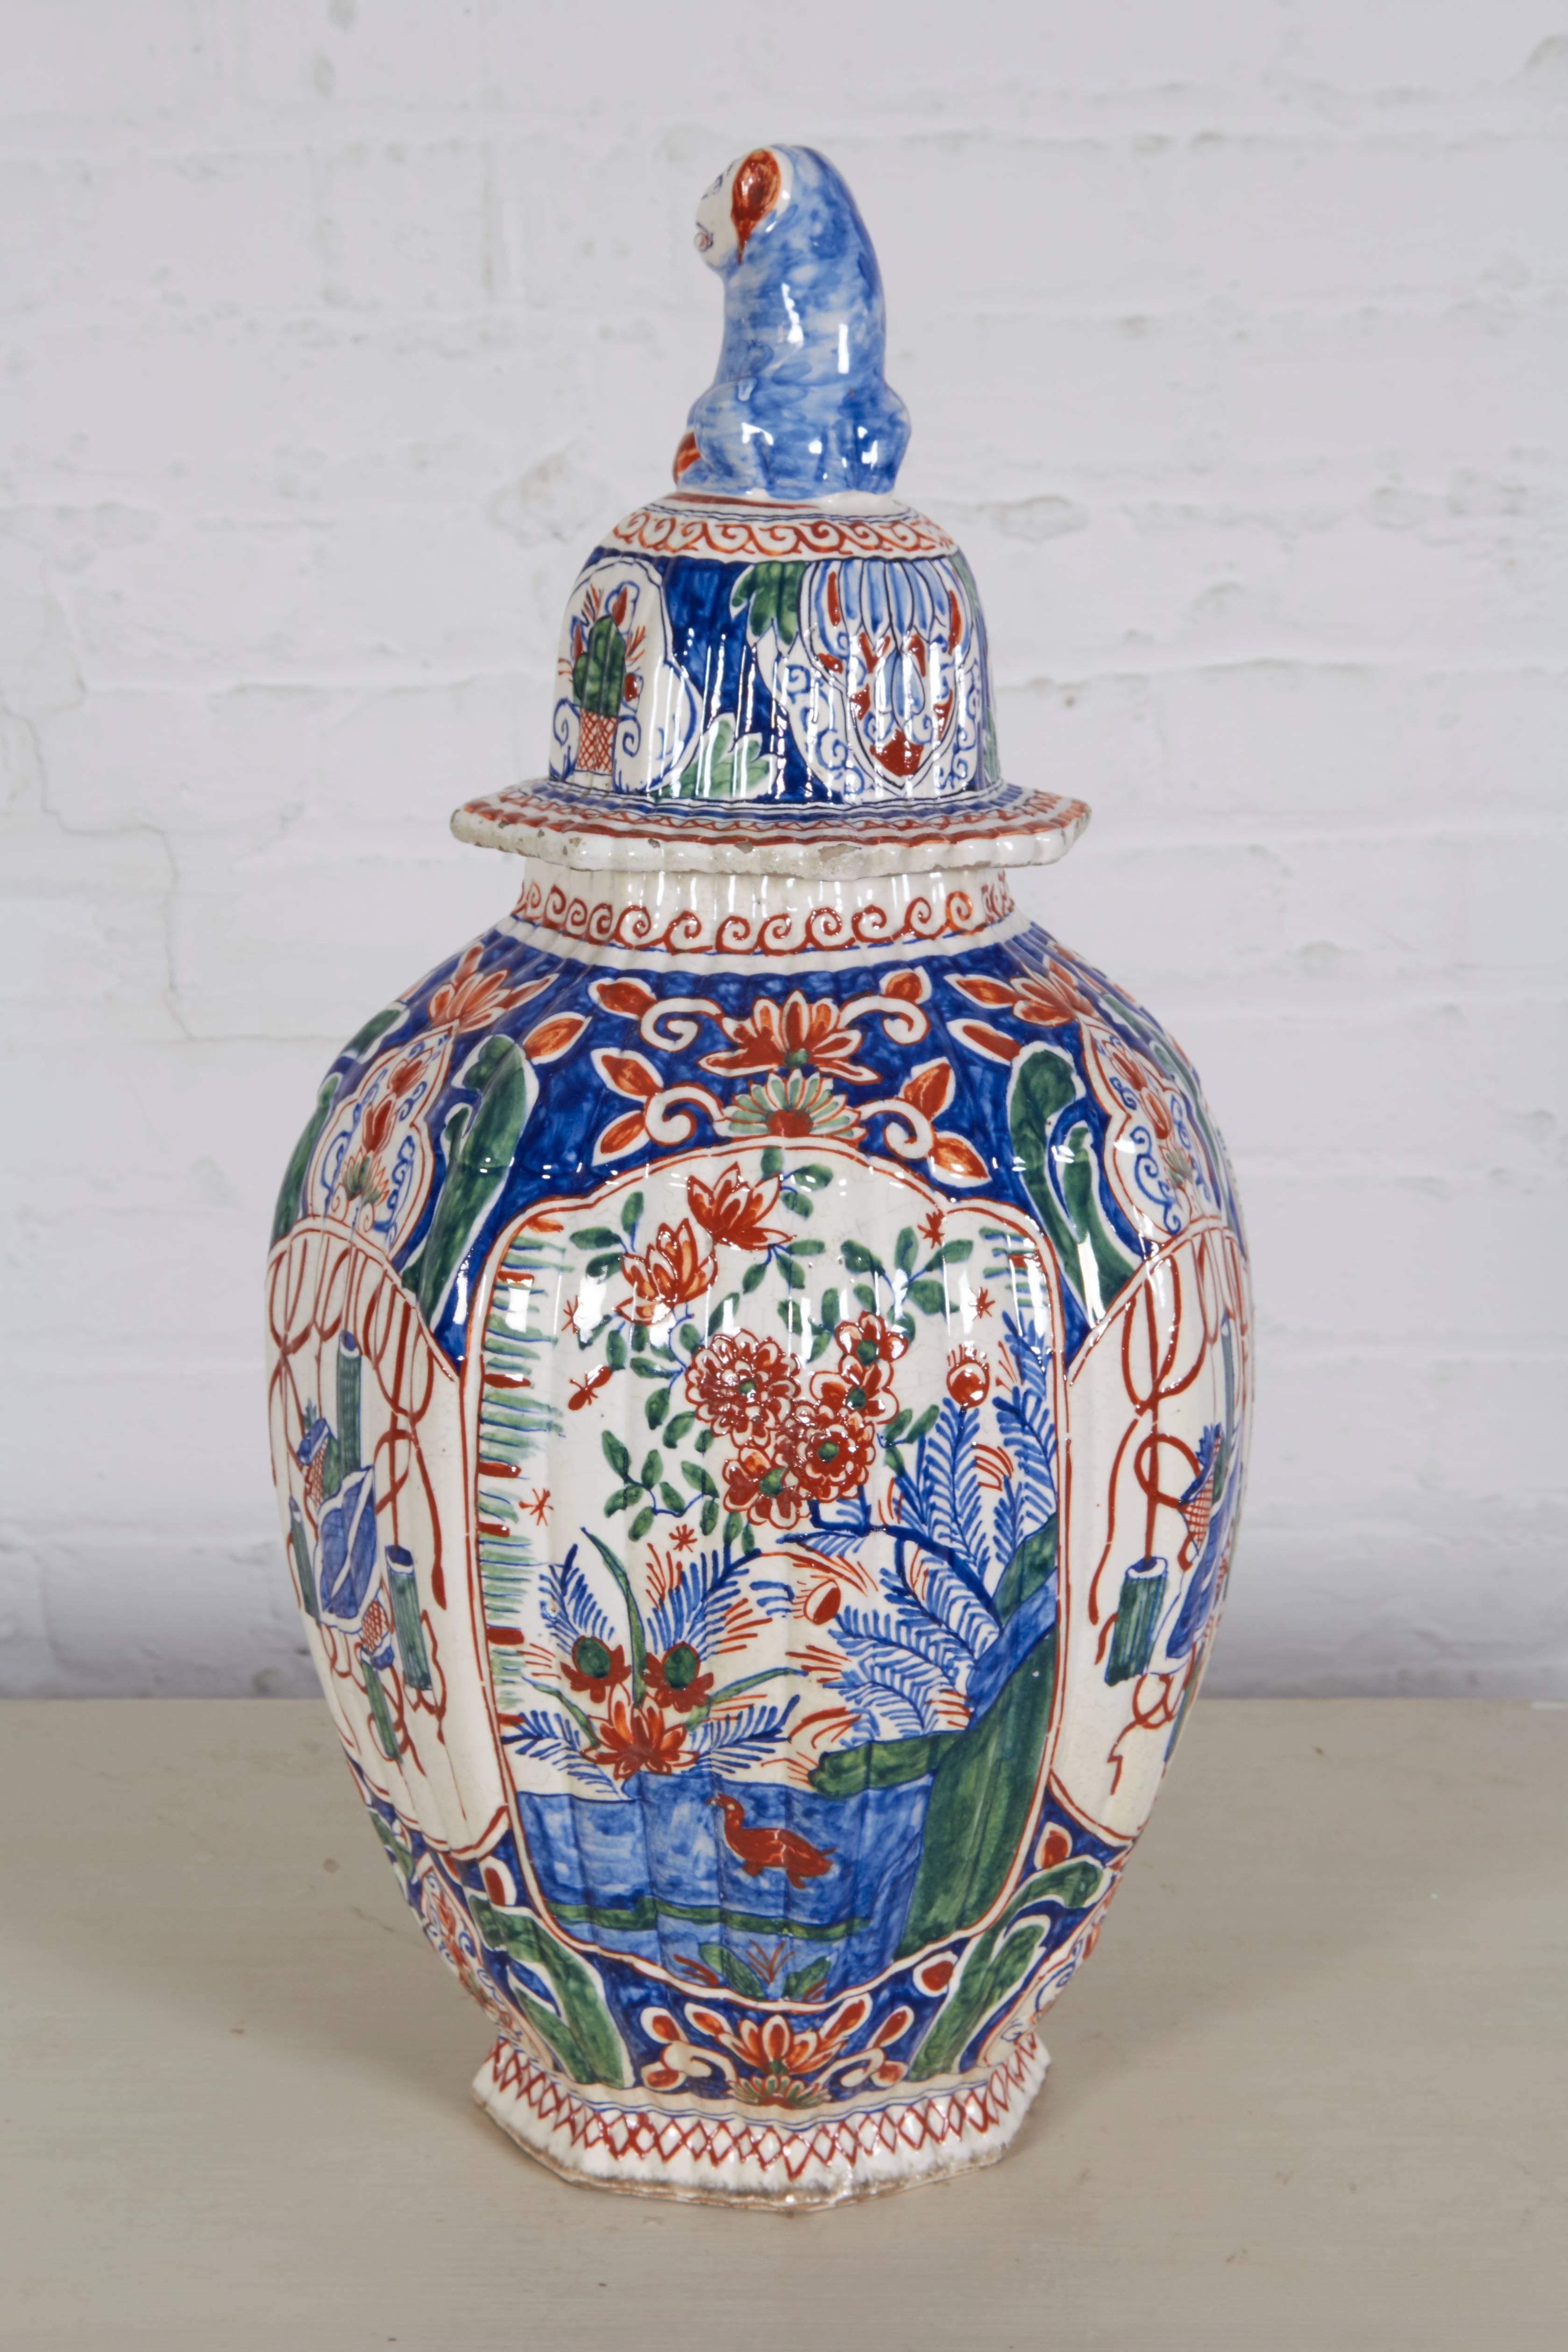 Of ribbed globular form decorated with panels of birds and floral sprays alternating with ceremonial vessels; surmounted by a lid with dog finial. With extensive markings to underside.